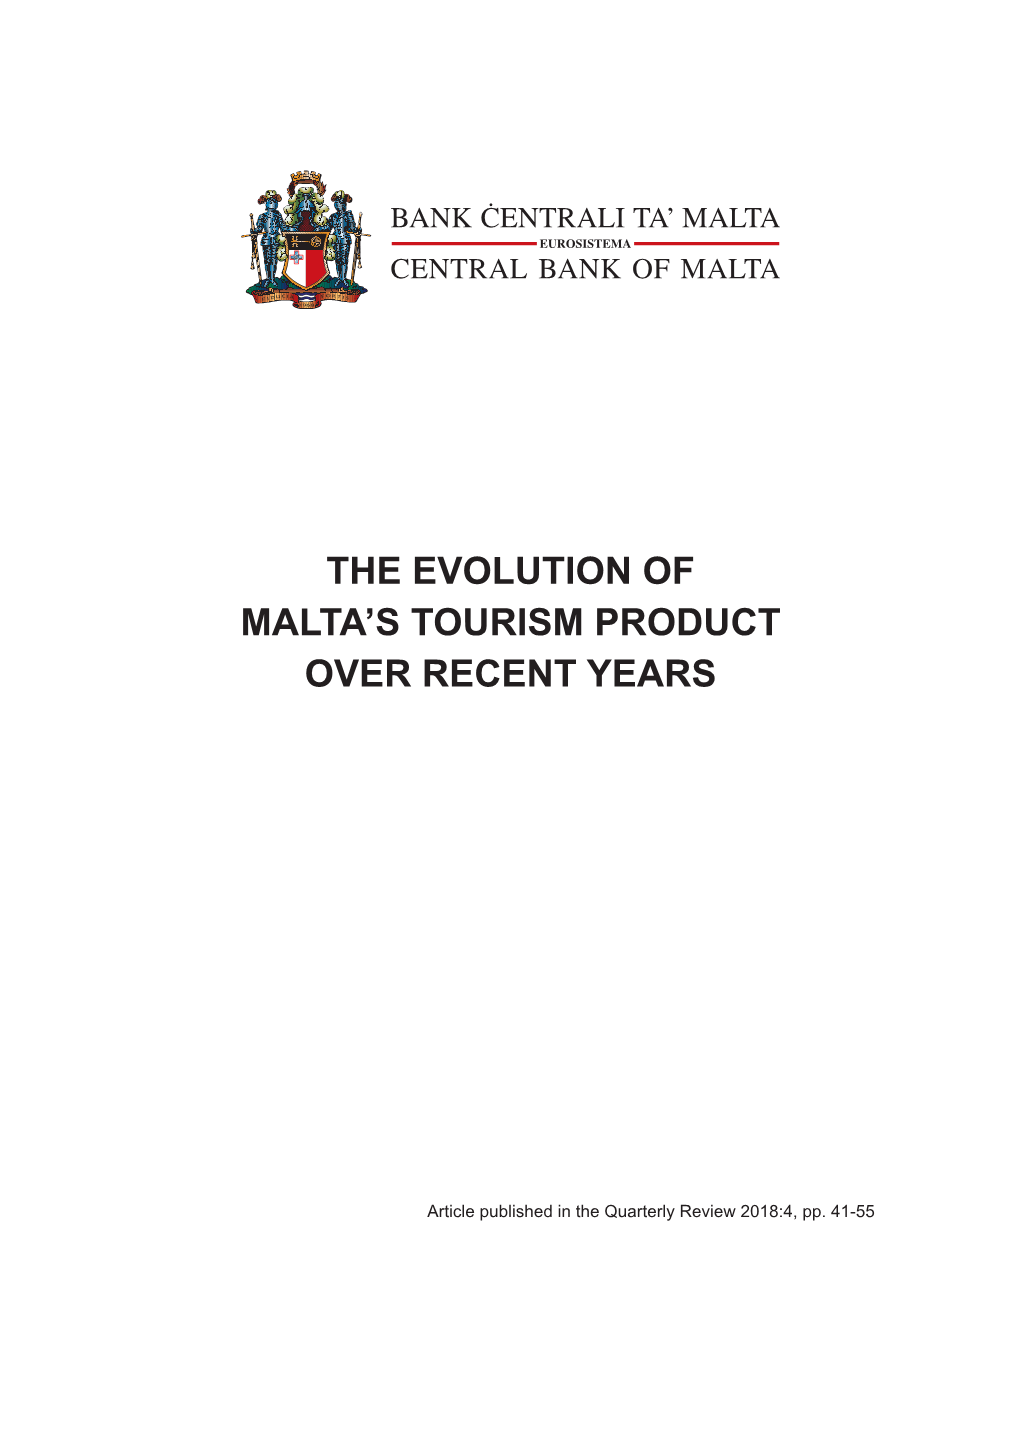 The Evolution of Malta's Tourism Product Over